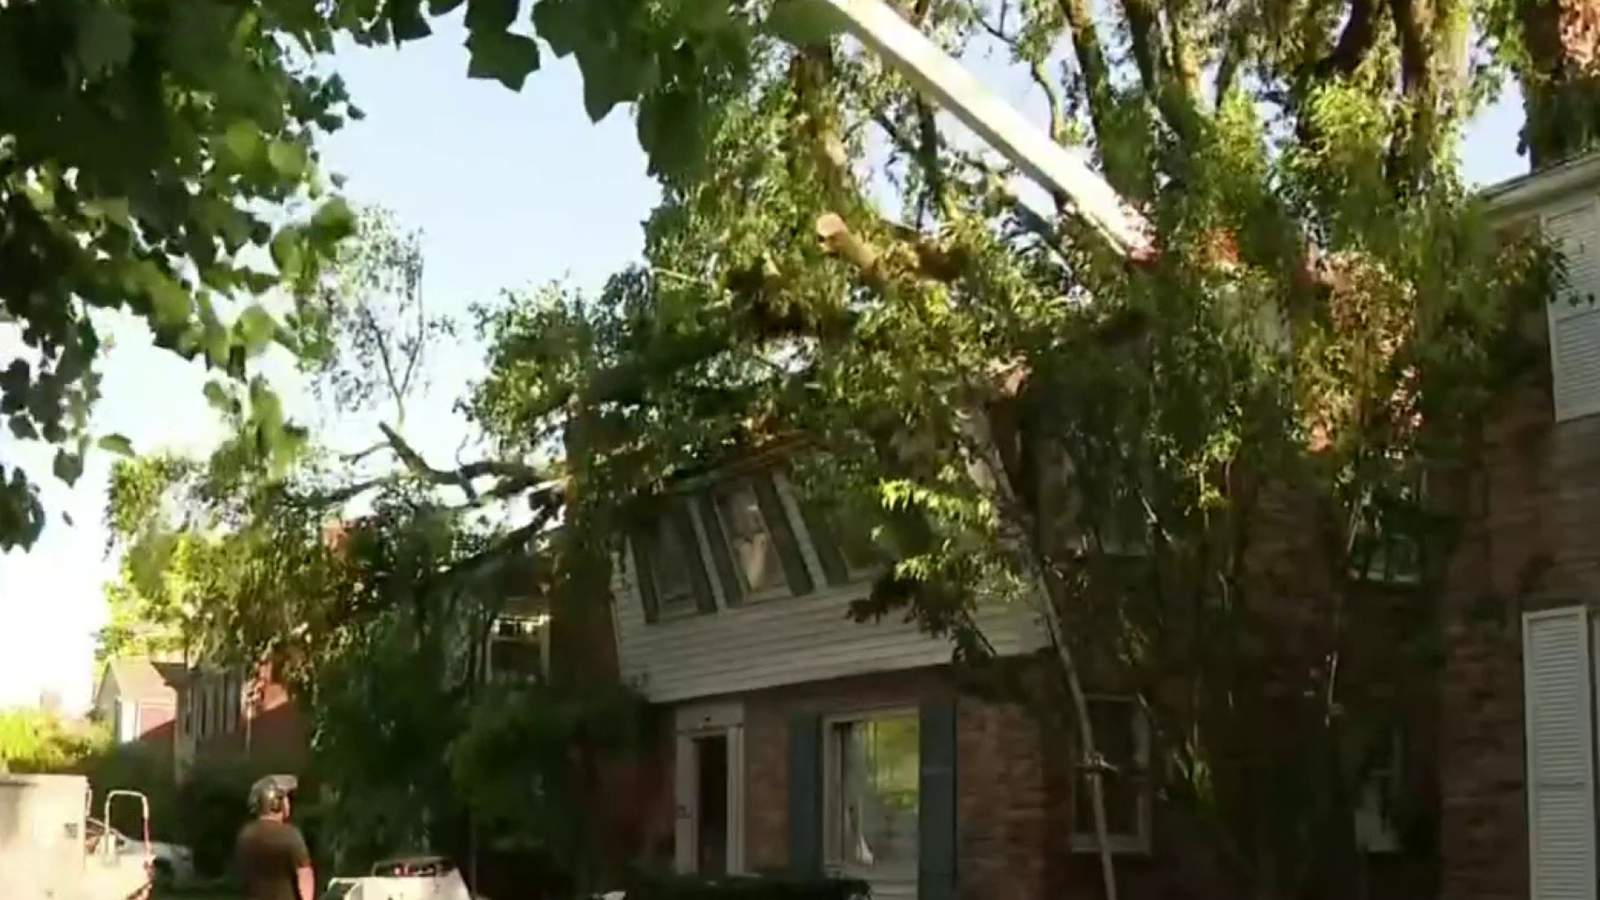 Grosse Pointe Woods residents work to repair damage after severe storms